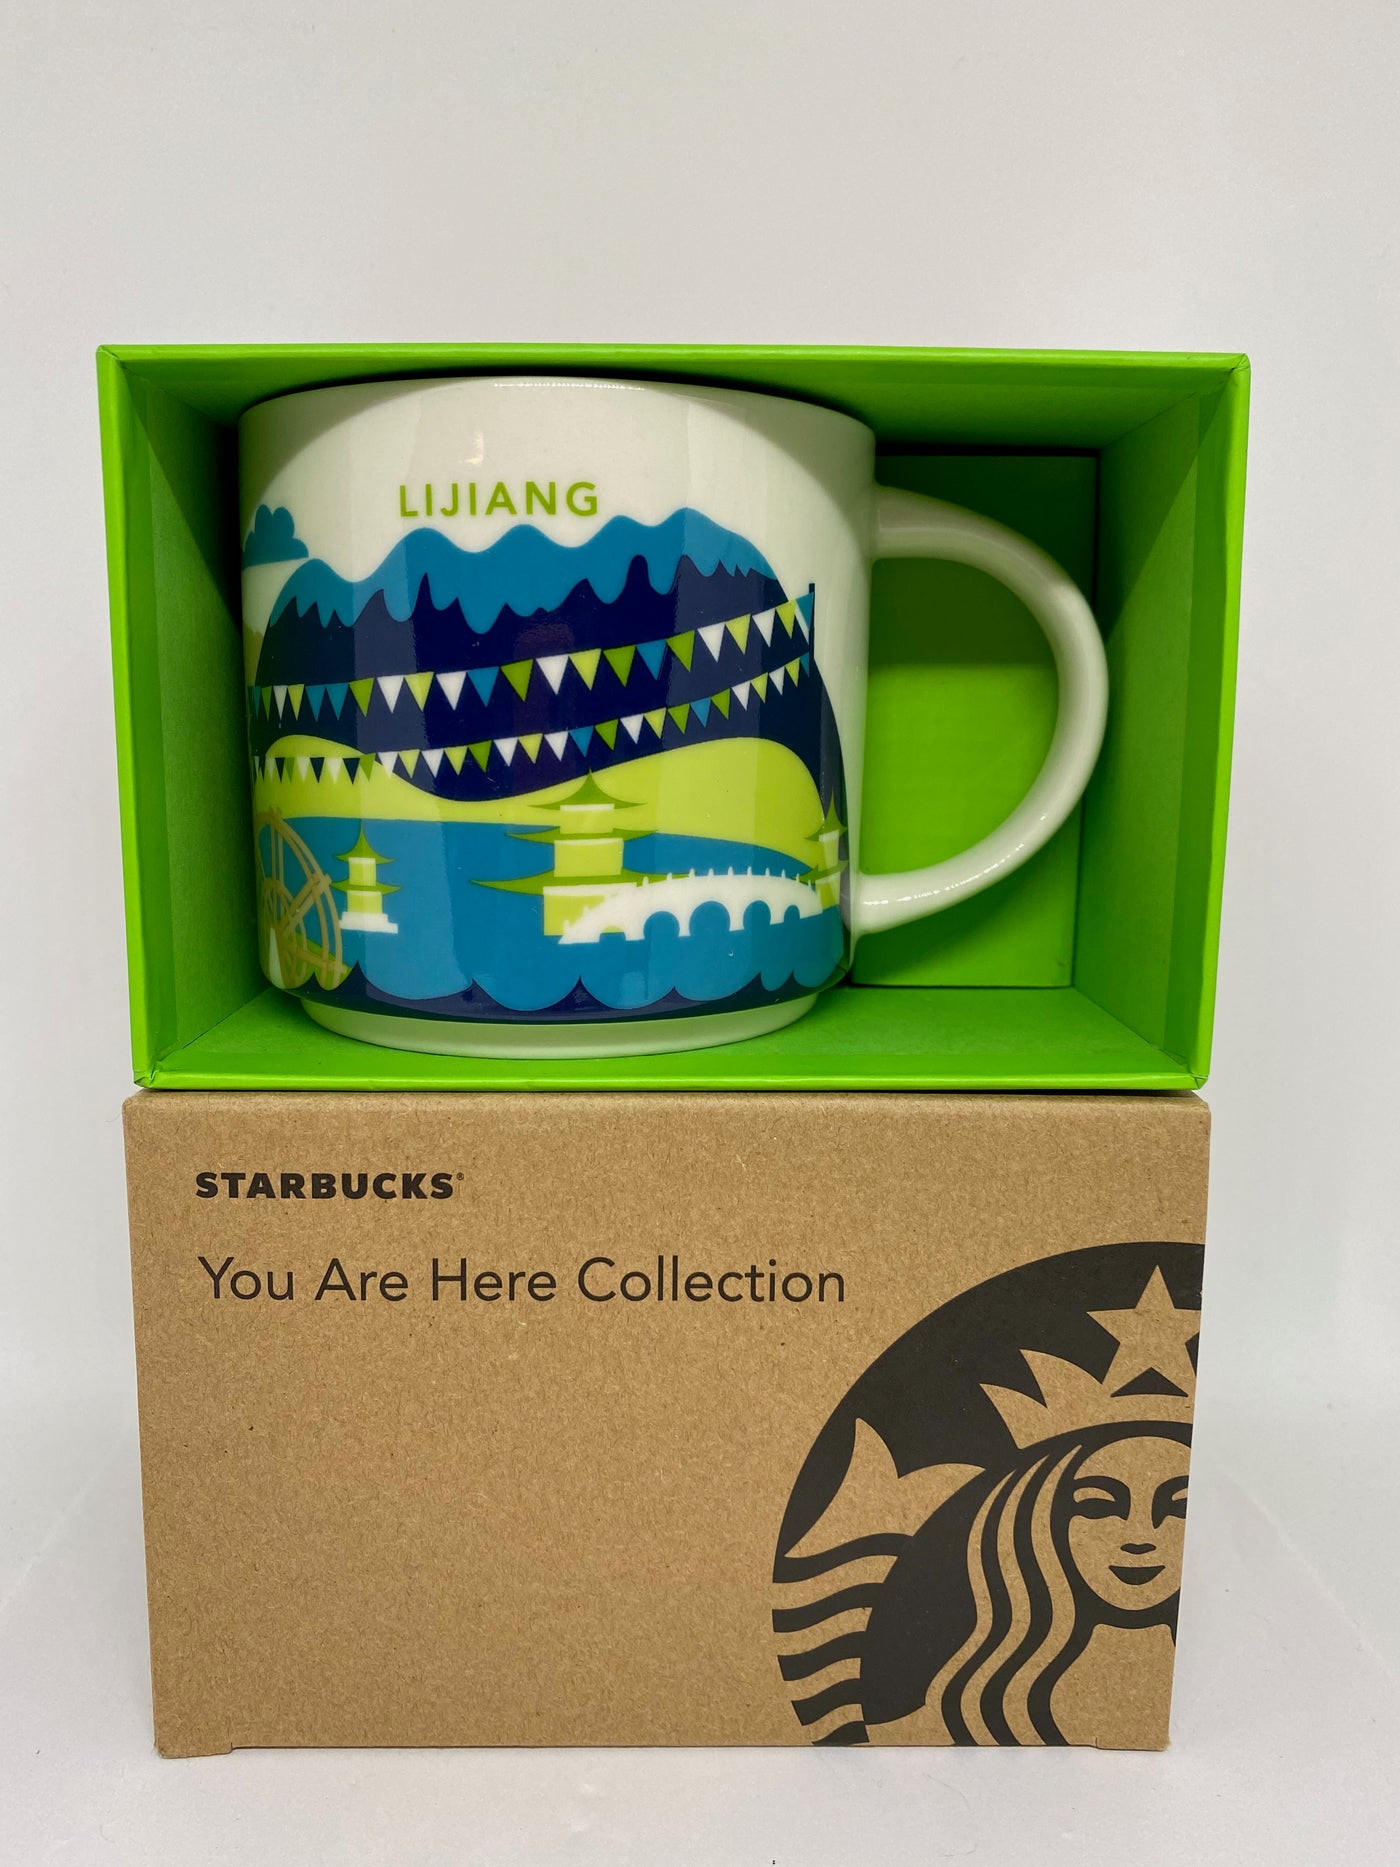 Starbucks You Are Here Collection Lijiang China Ceramic Coffee Mug New With Box